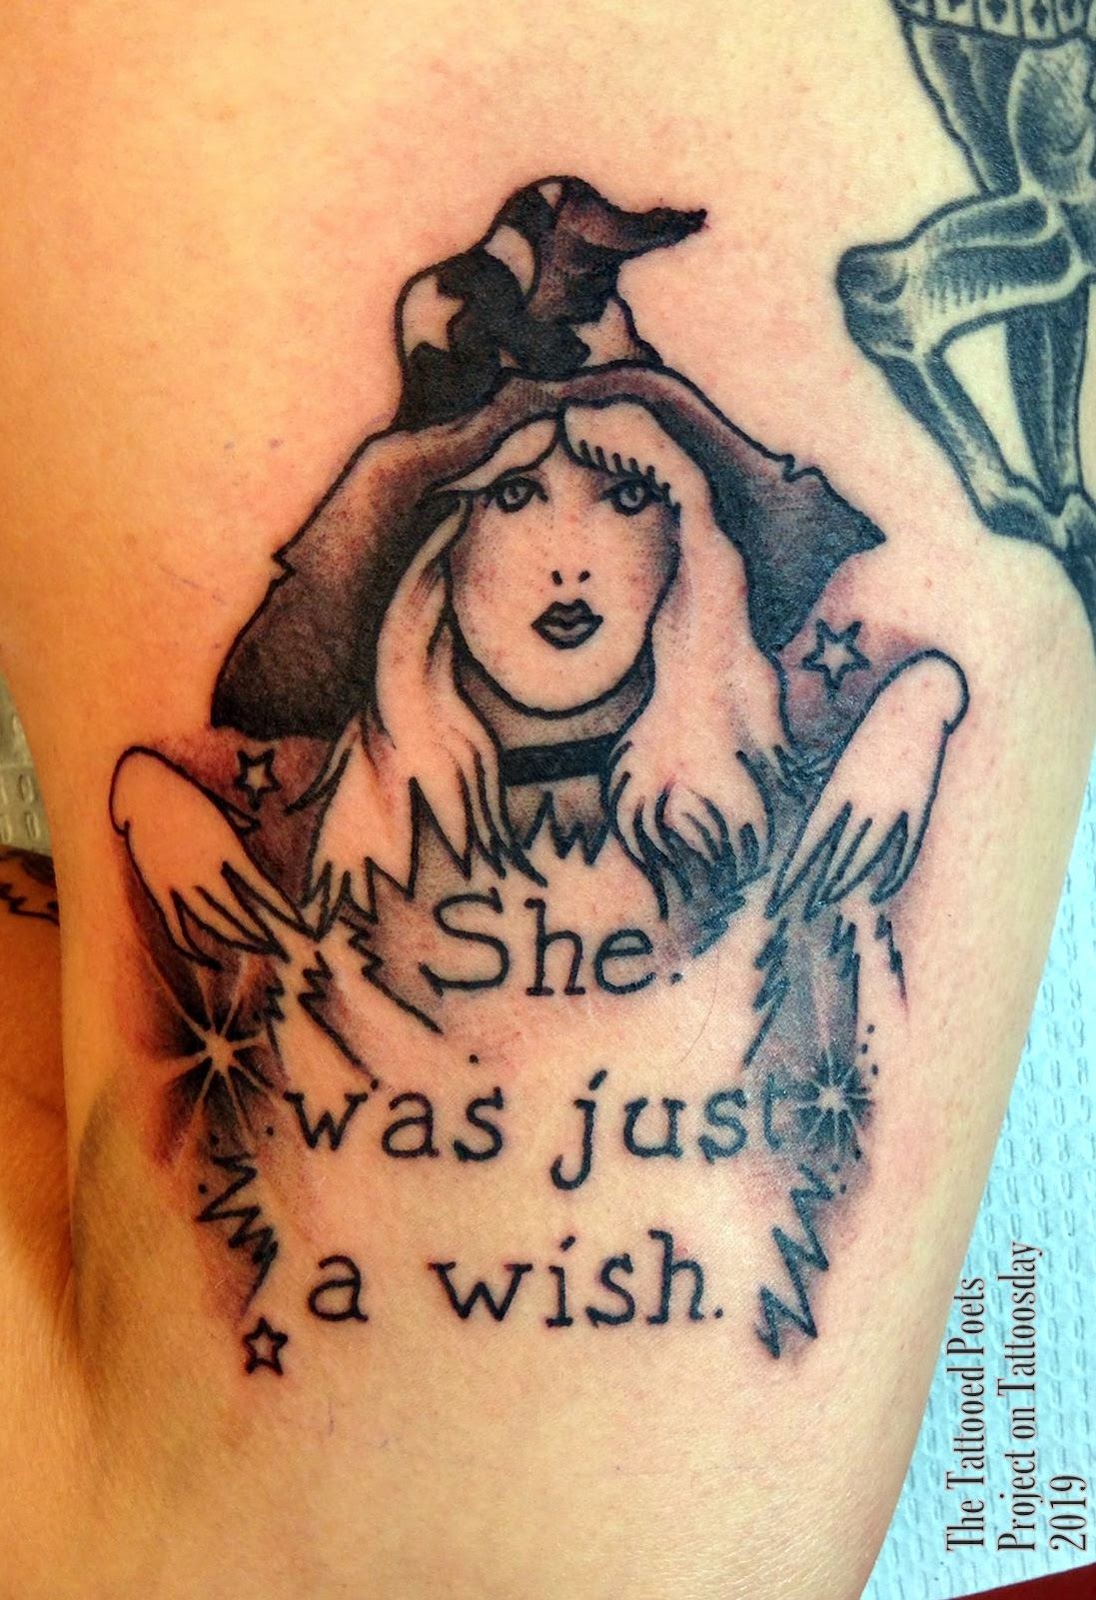 Keith Richards and Stevie Nicks tattooed on the inner